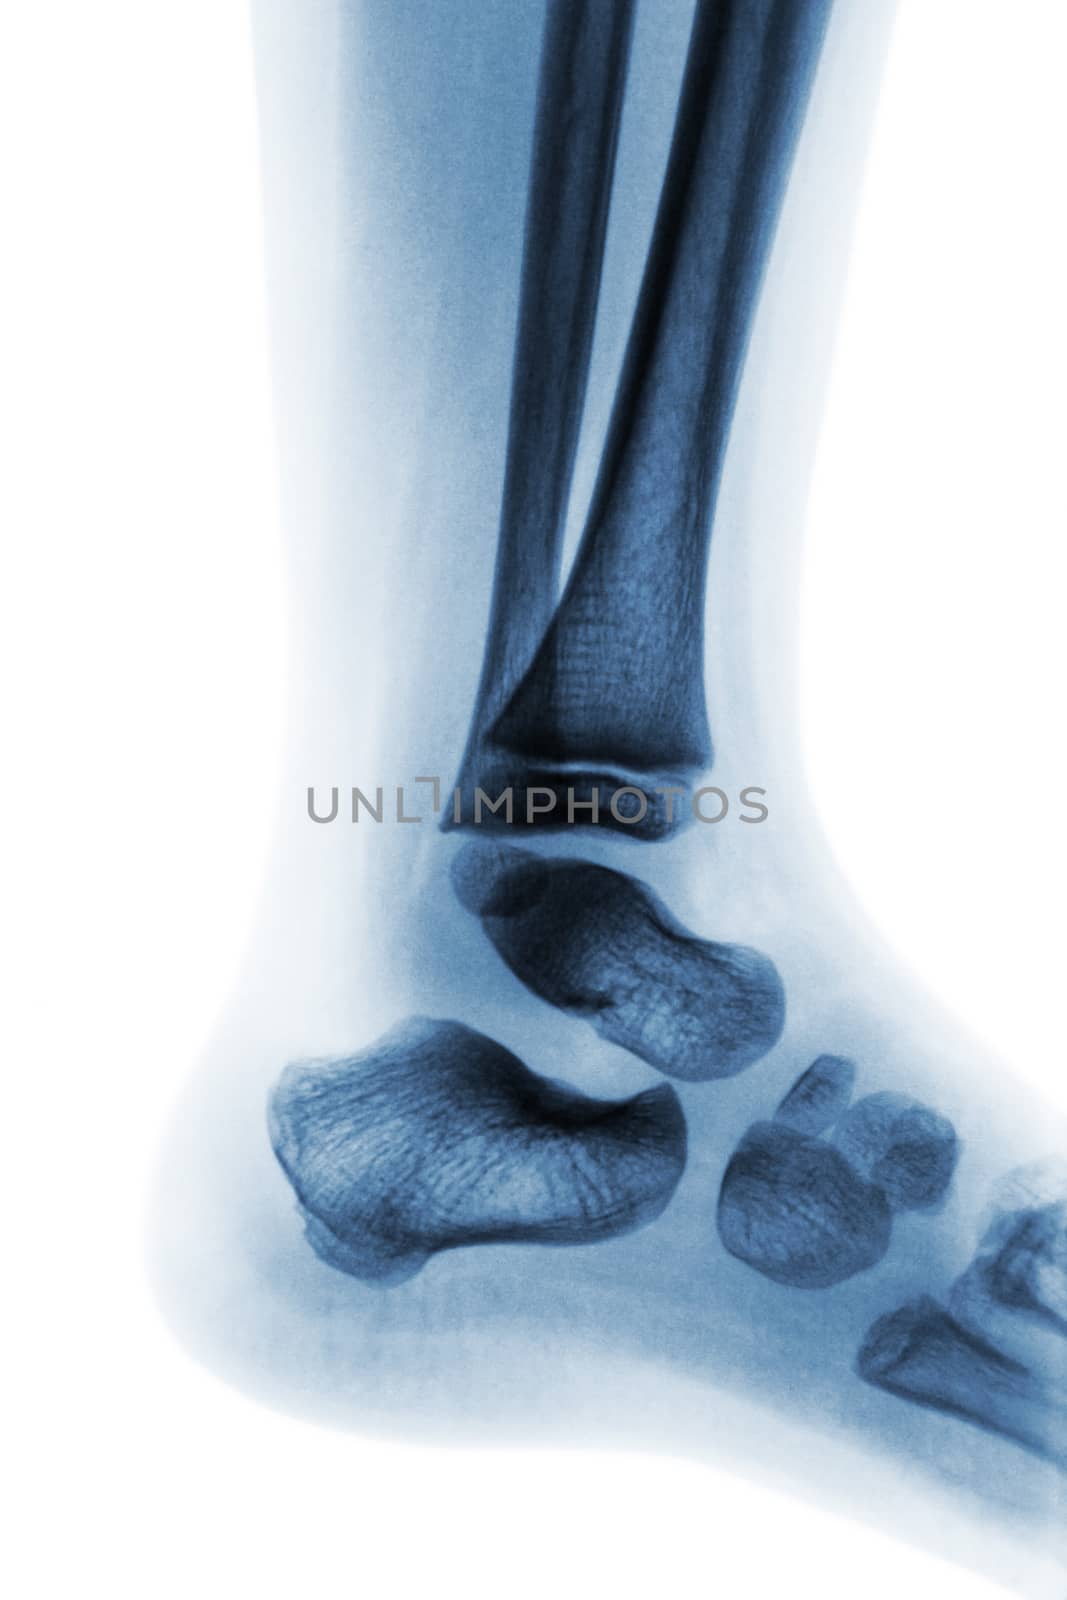 Film x-ray of normal child ankle . Lateral view by stockdevil